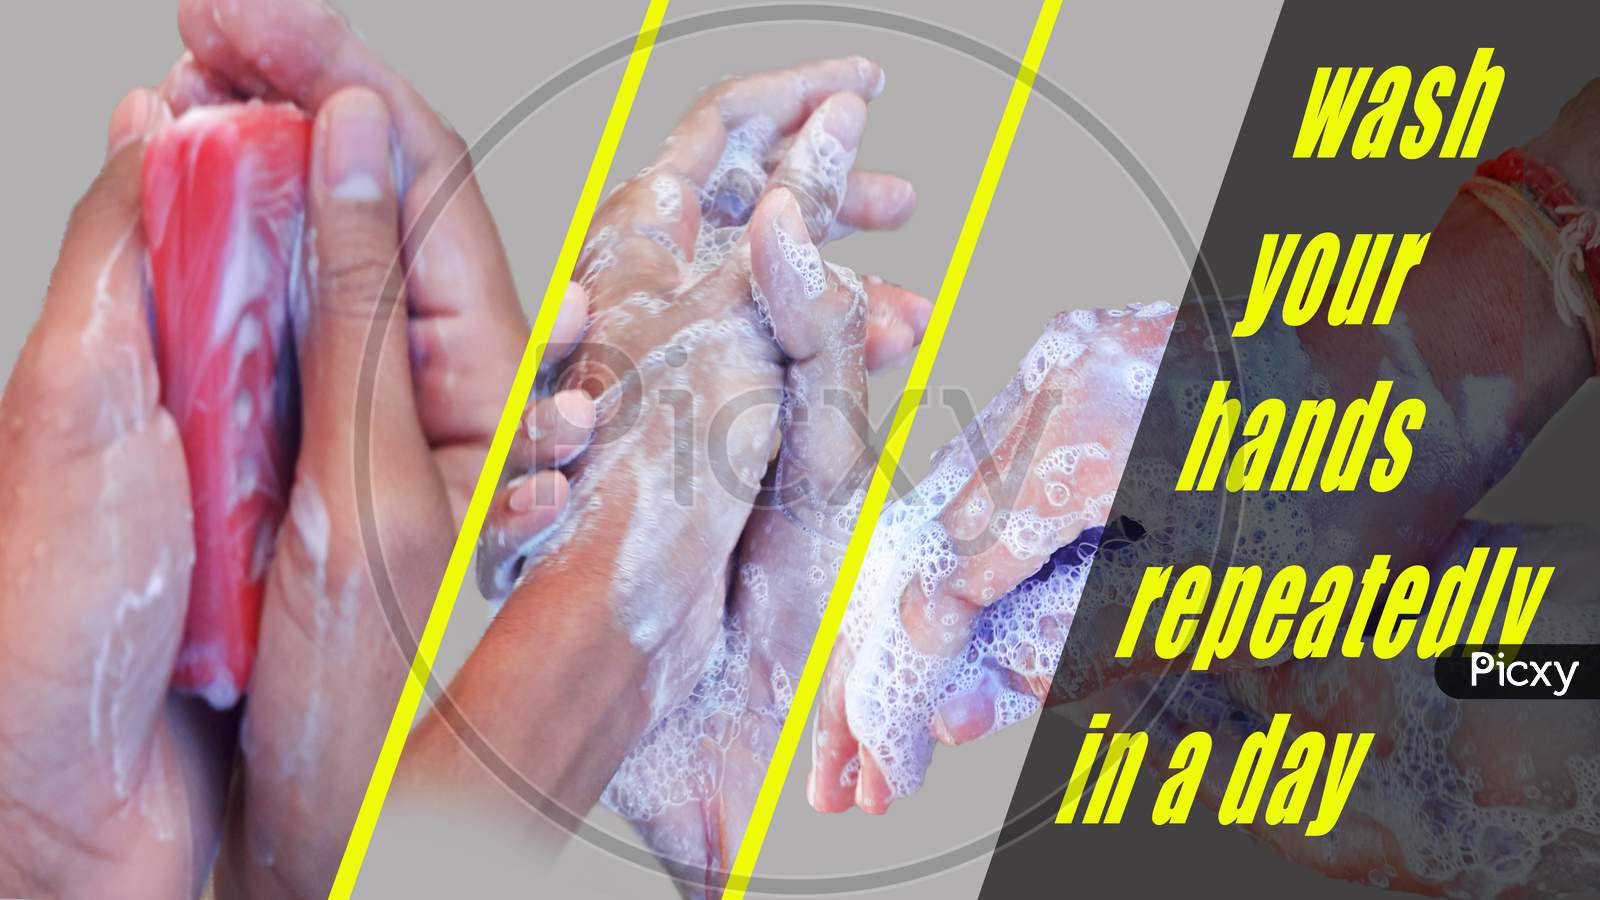 A hand washing poster to aware the public against COVID-19 or other germs.